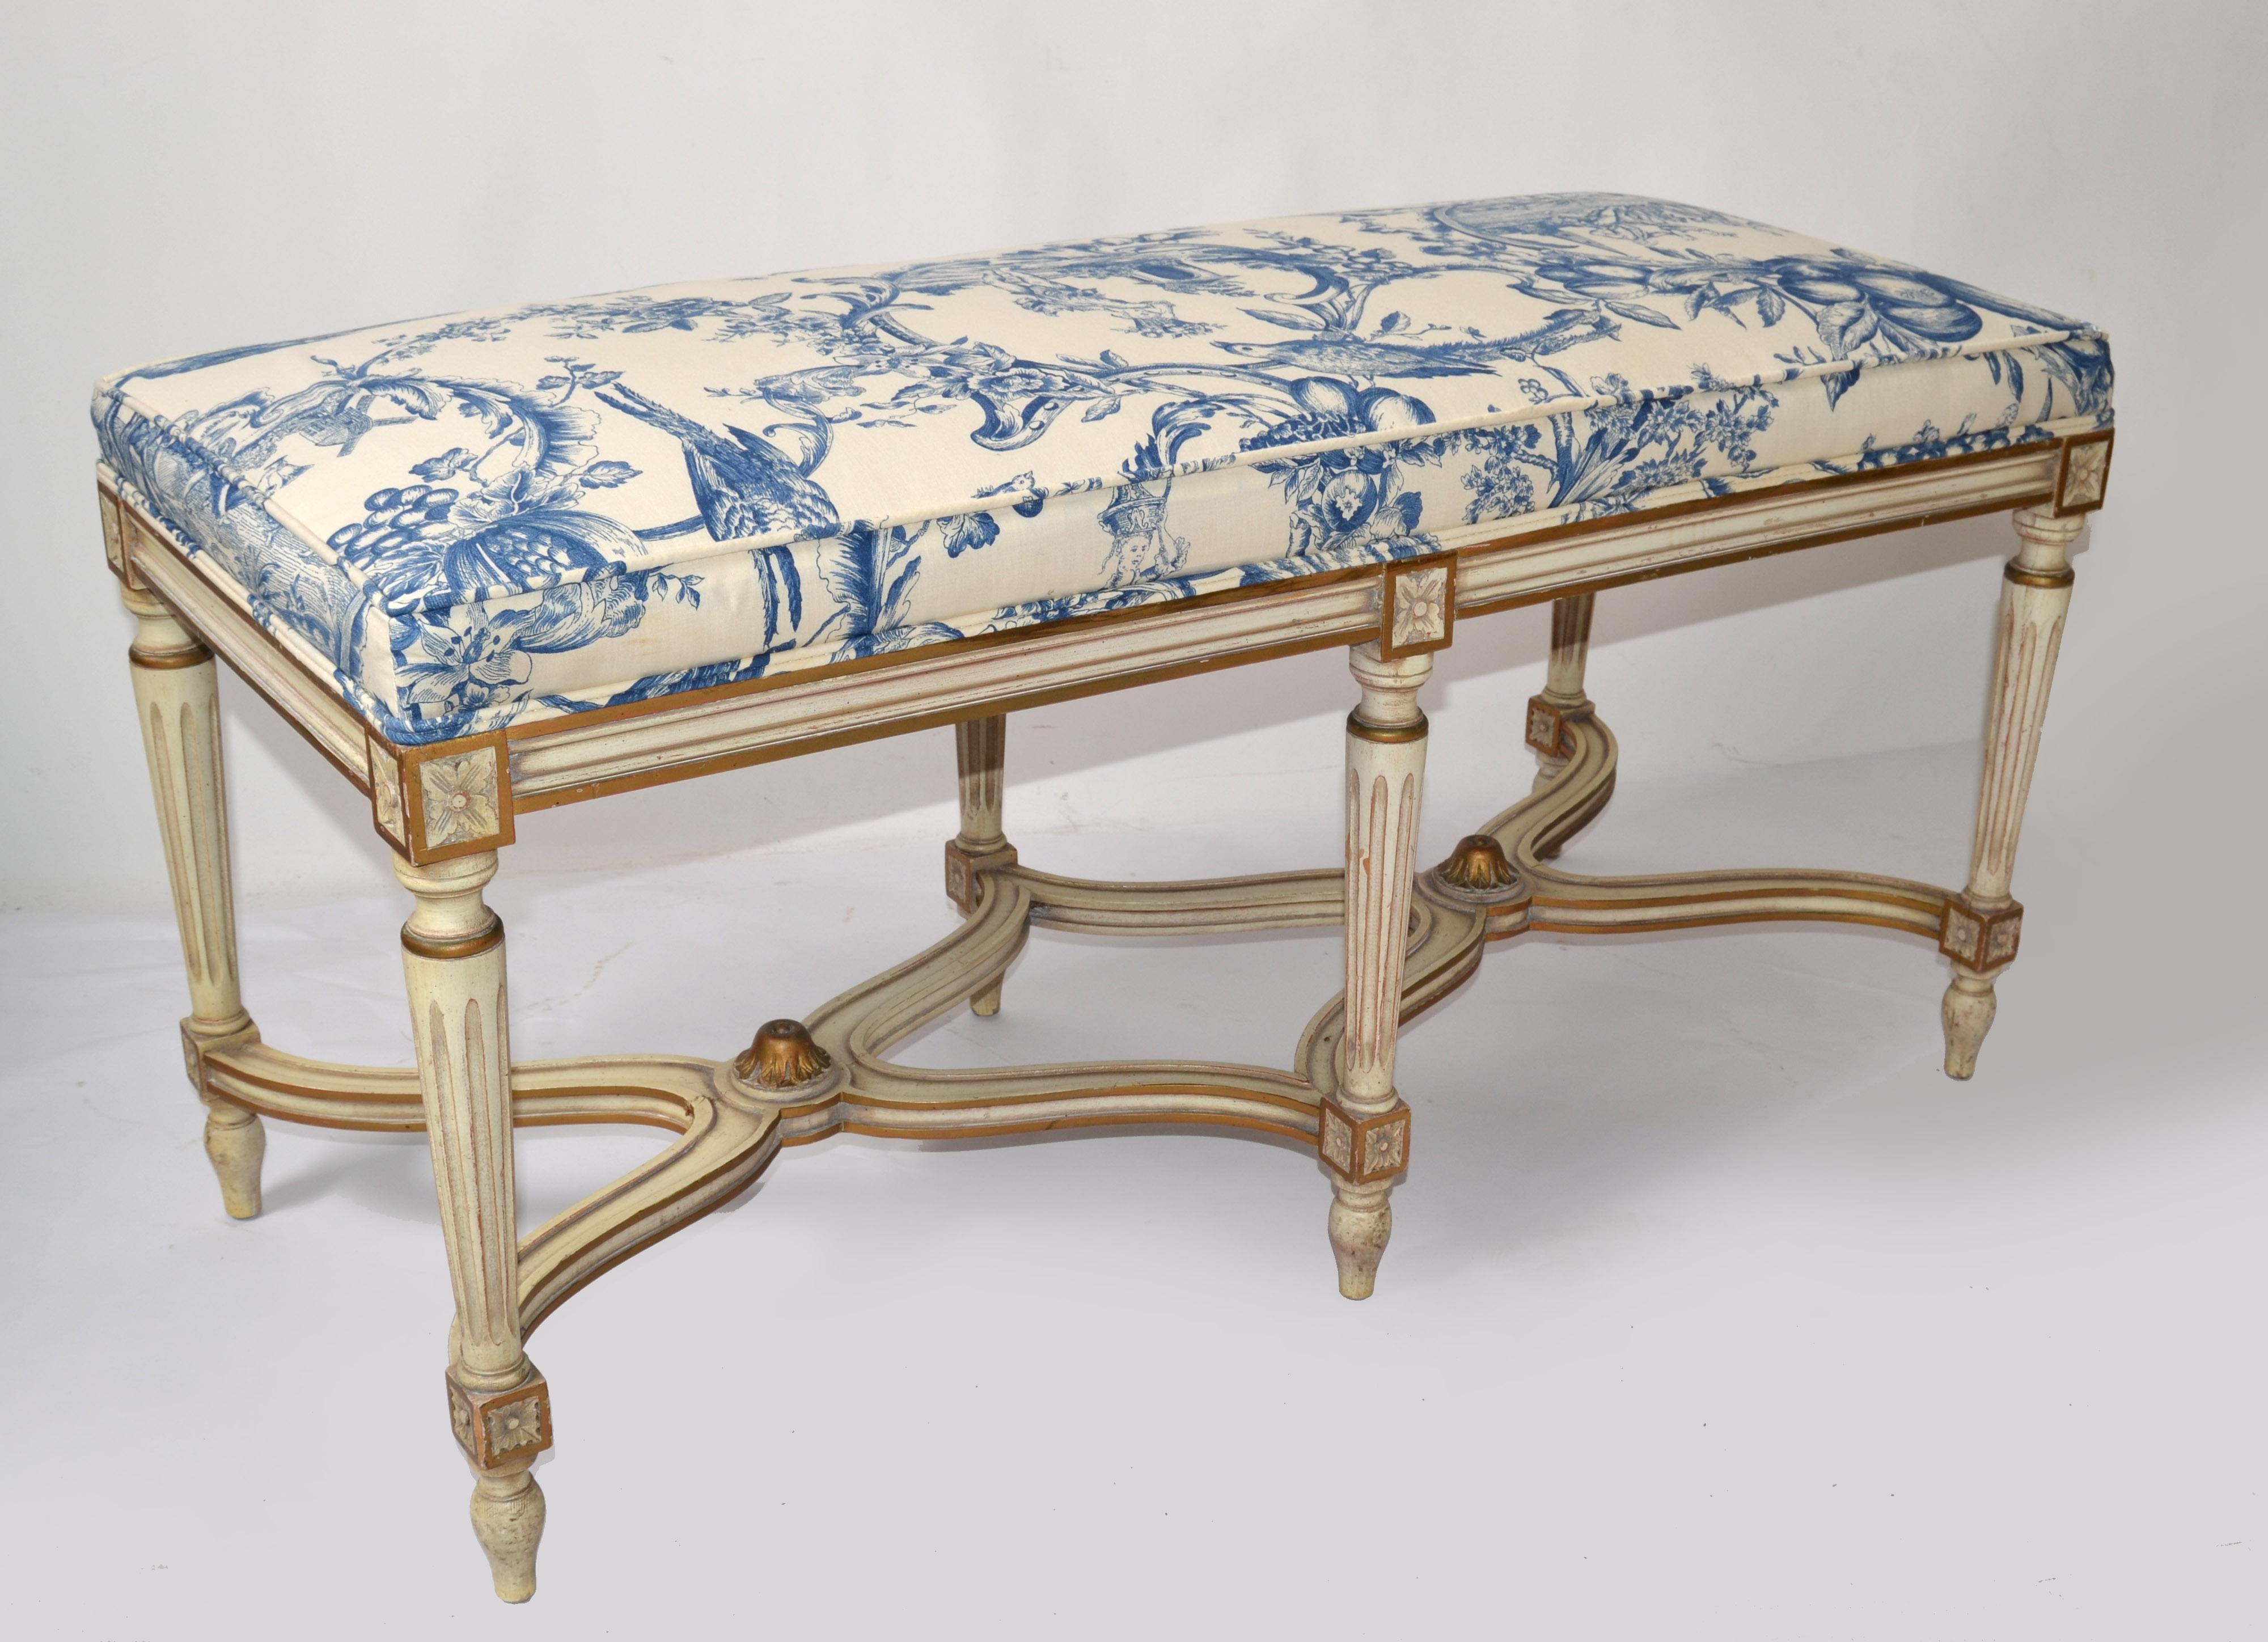 Exquisite Louis XVI Bench Karges Furniture Co. hand carved hardwood blue motif fabric made in Indiana, USA. 
The apron, stretchers and legs on this graceful French style bench are all hand carved. It is standard with a boxed pullover seat.
Makers